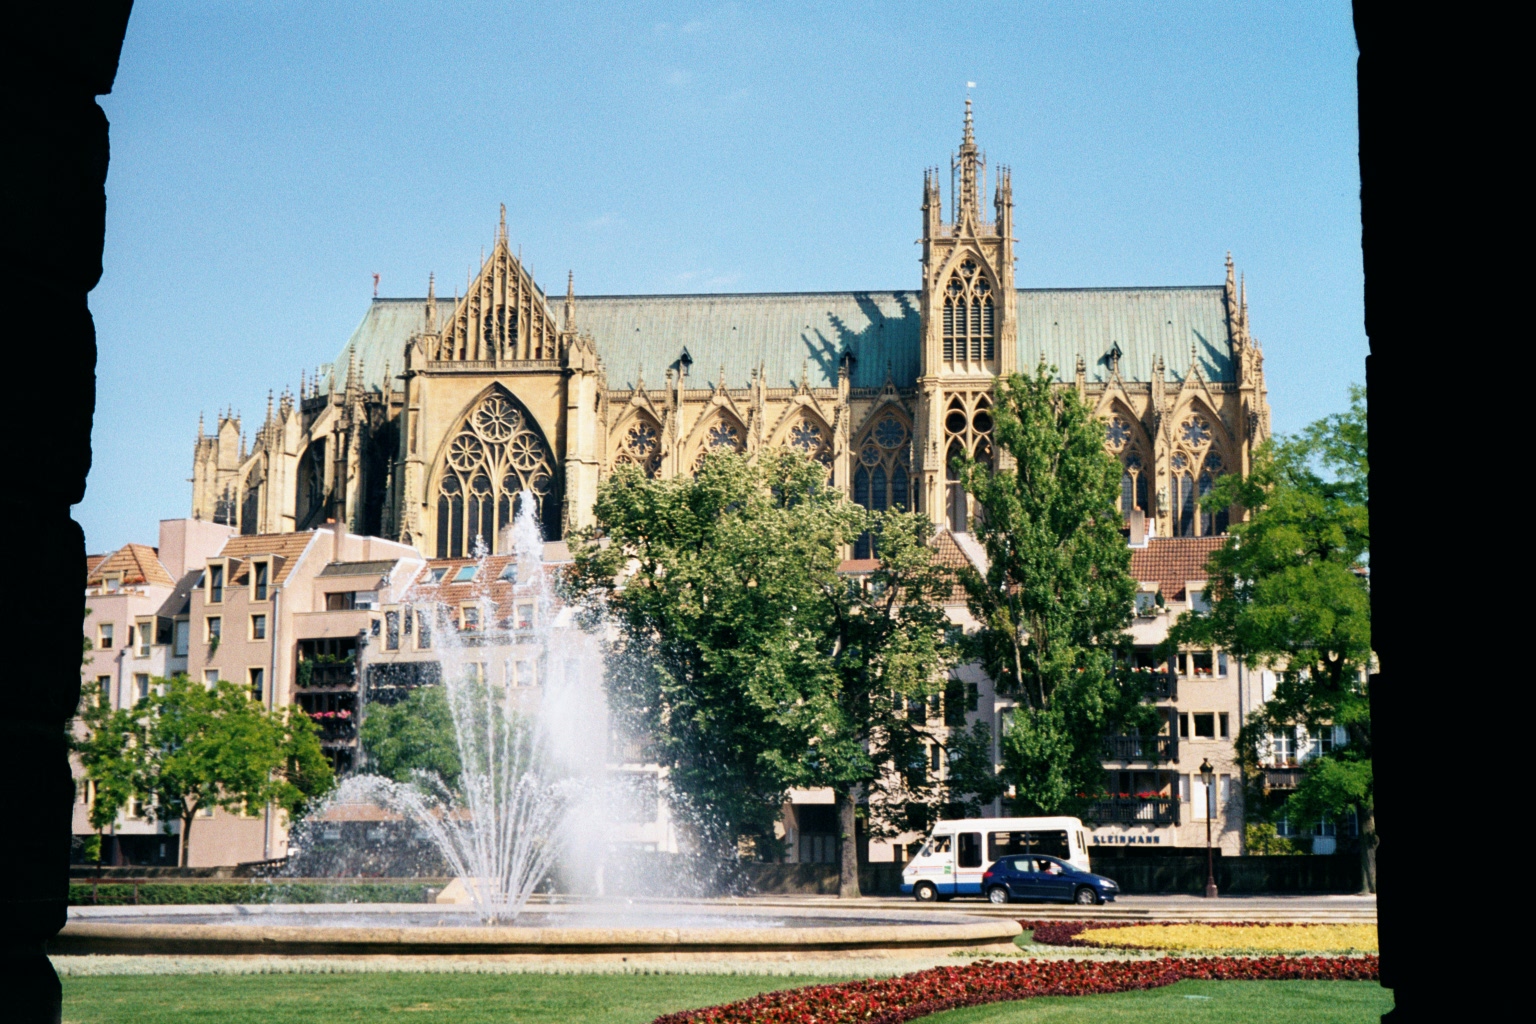 The cathedral of Metz towering over nearby buildings